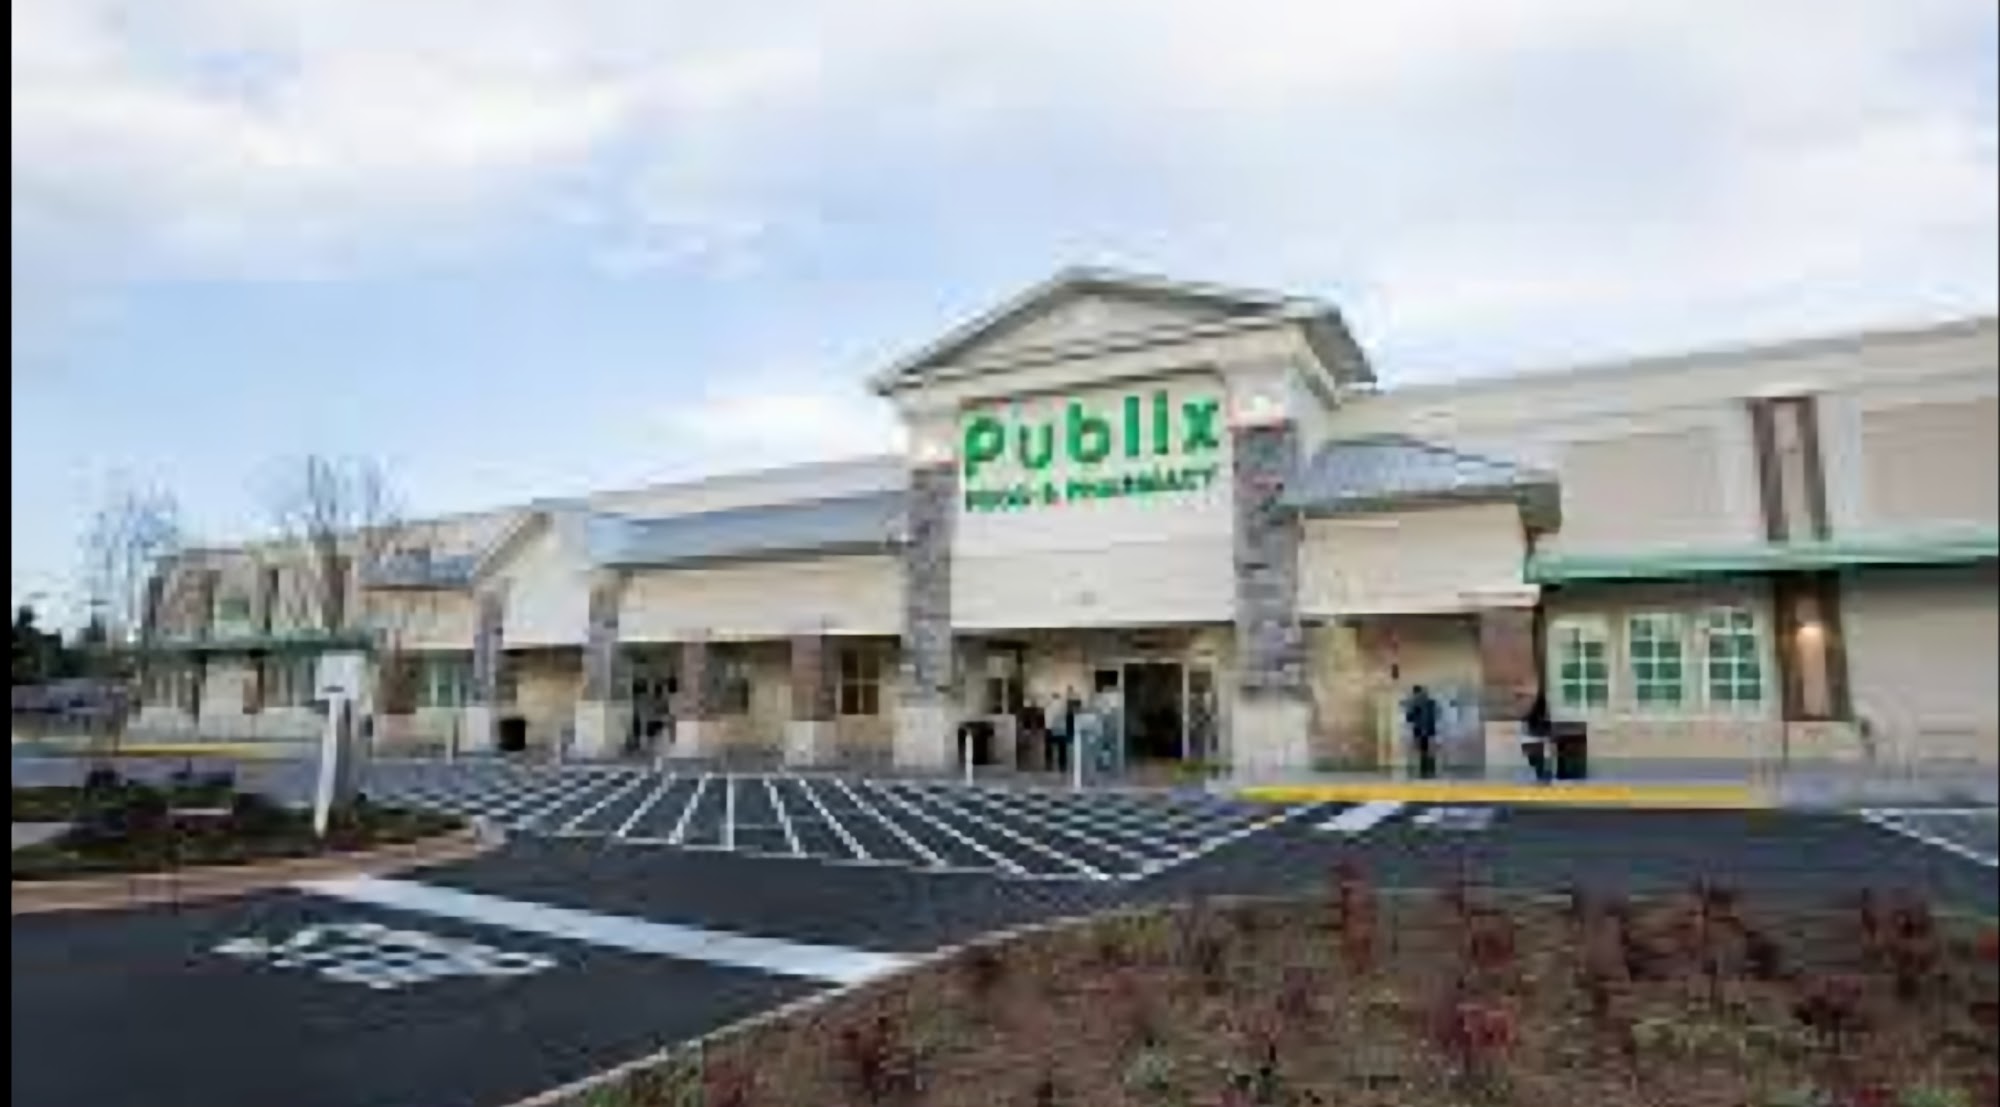 Publix Pharmacy at Lake Hickory Crossings